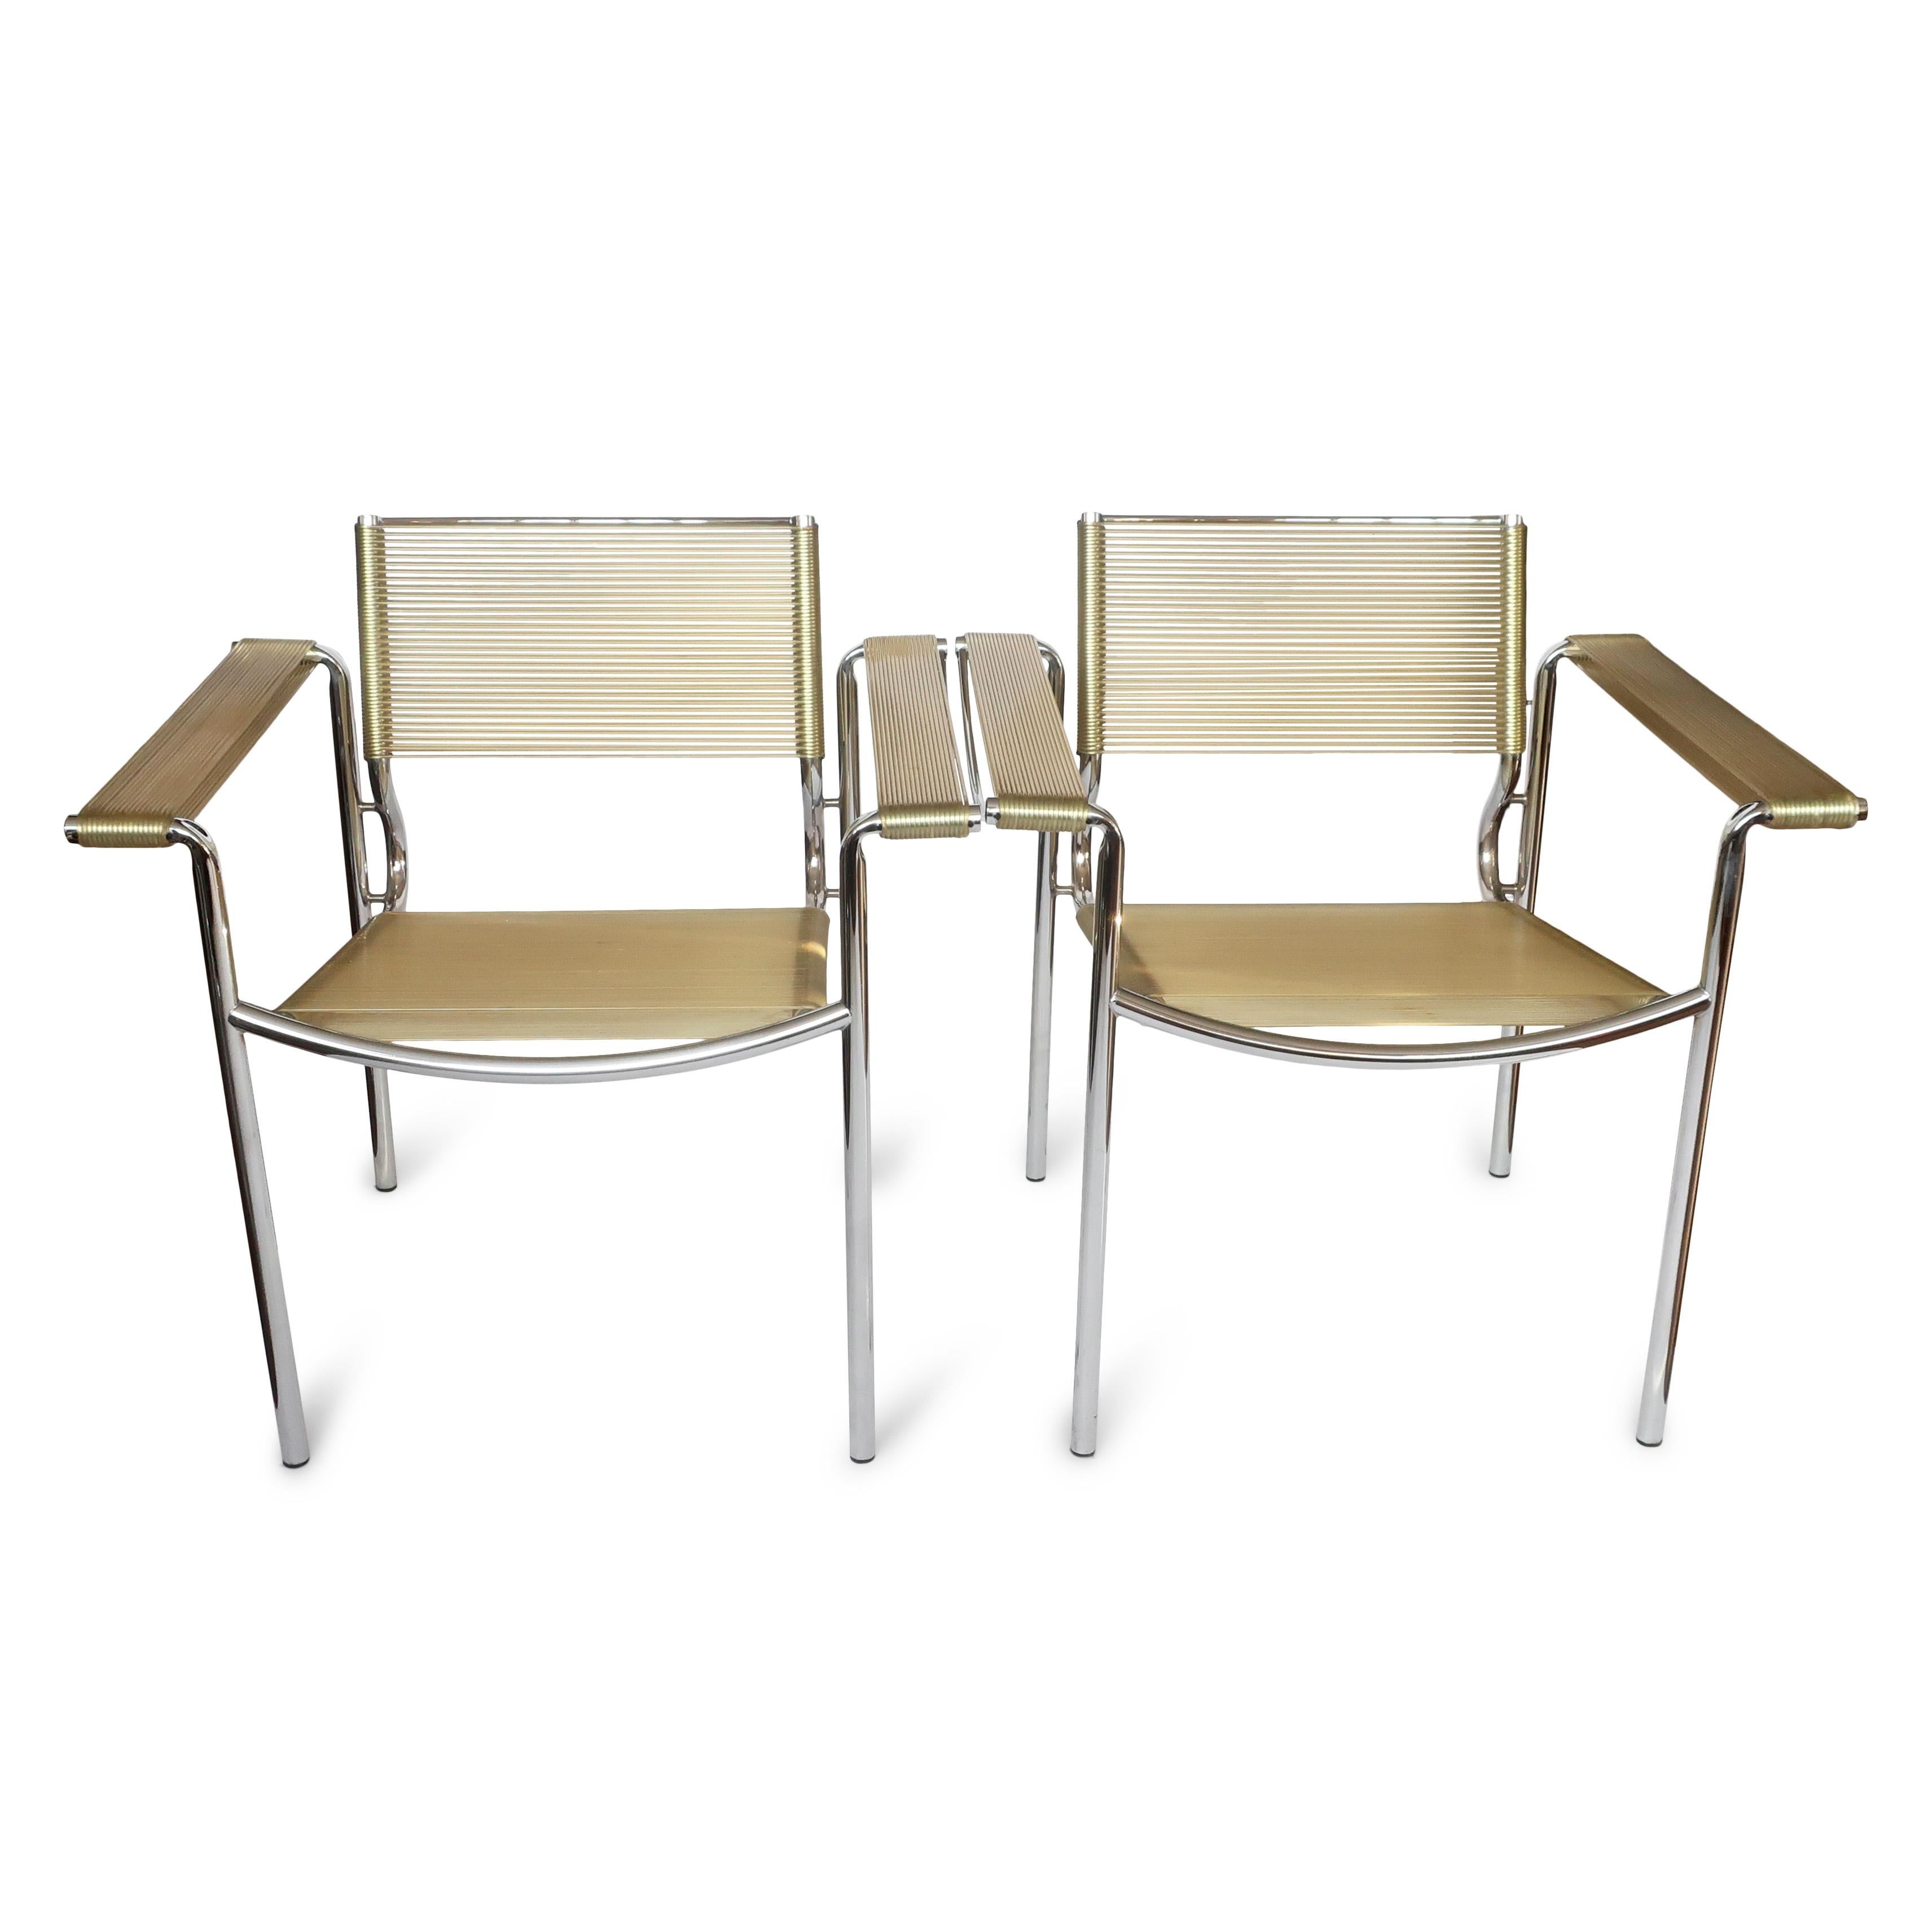 A pair of vintage Alias 109 Spaghetti armchairs with tan seat, back, and arm rests on a chrome frame by Giandomenico Belotti.  A classic of modern design that can be found in the permanent design collection of the MoMA, these are named for the